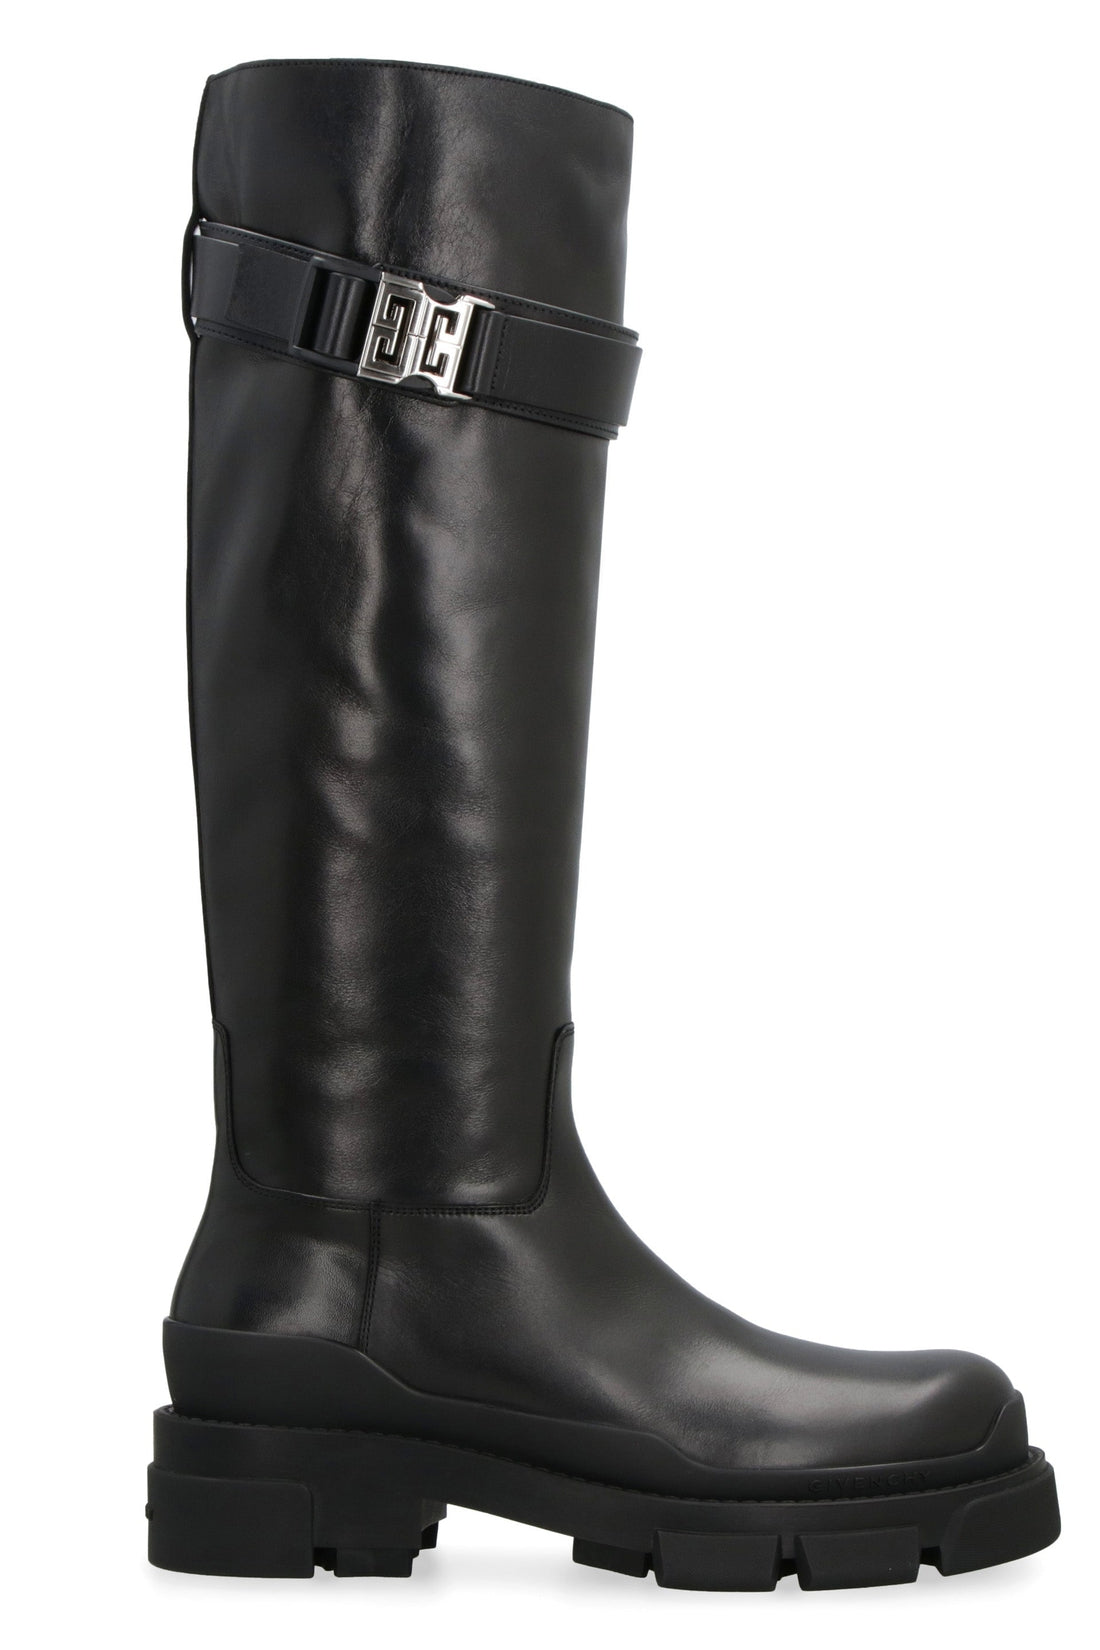 Givenchy-OUTLET-SALE-Terra leather boots-ARCHIVIST